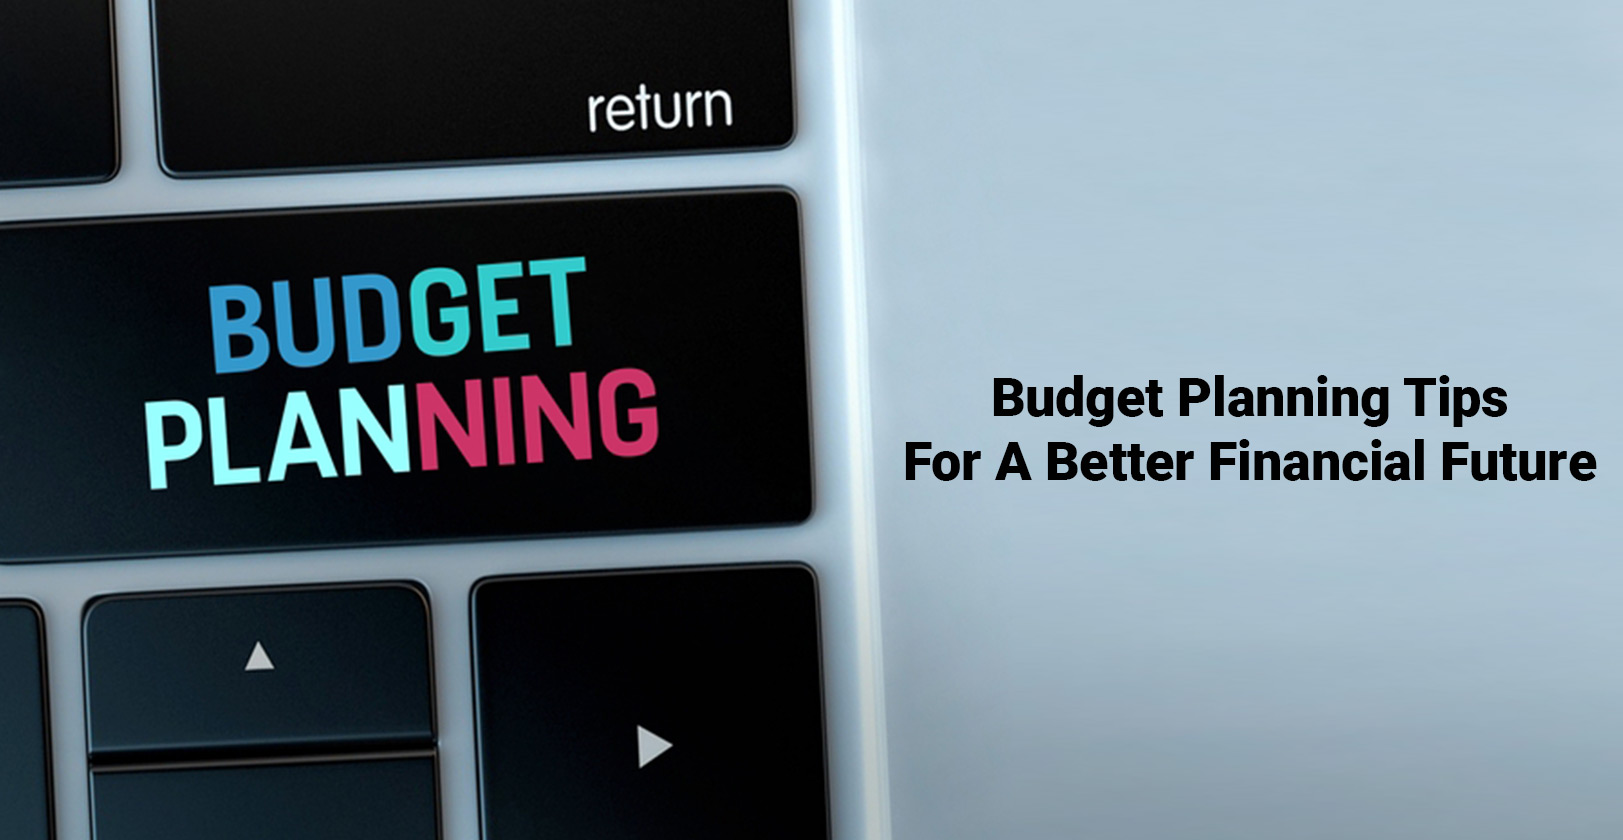 Budget Planning Tips For A Better Financial Future